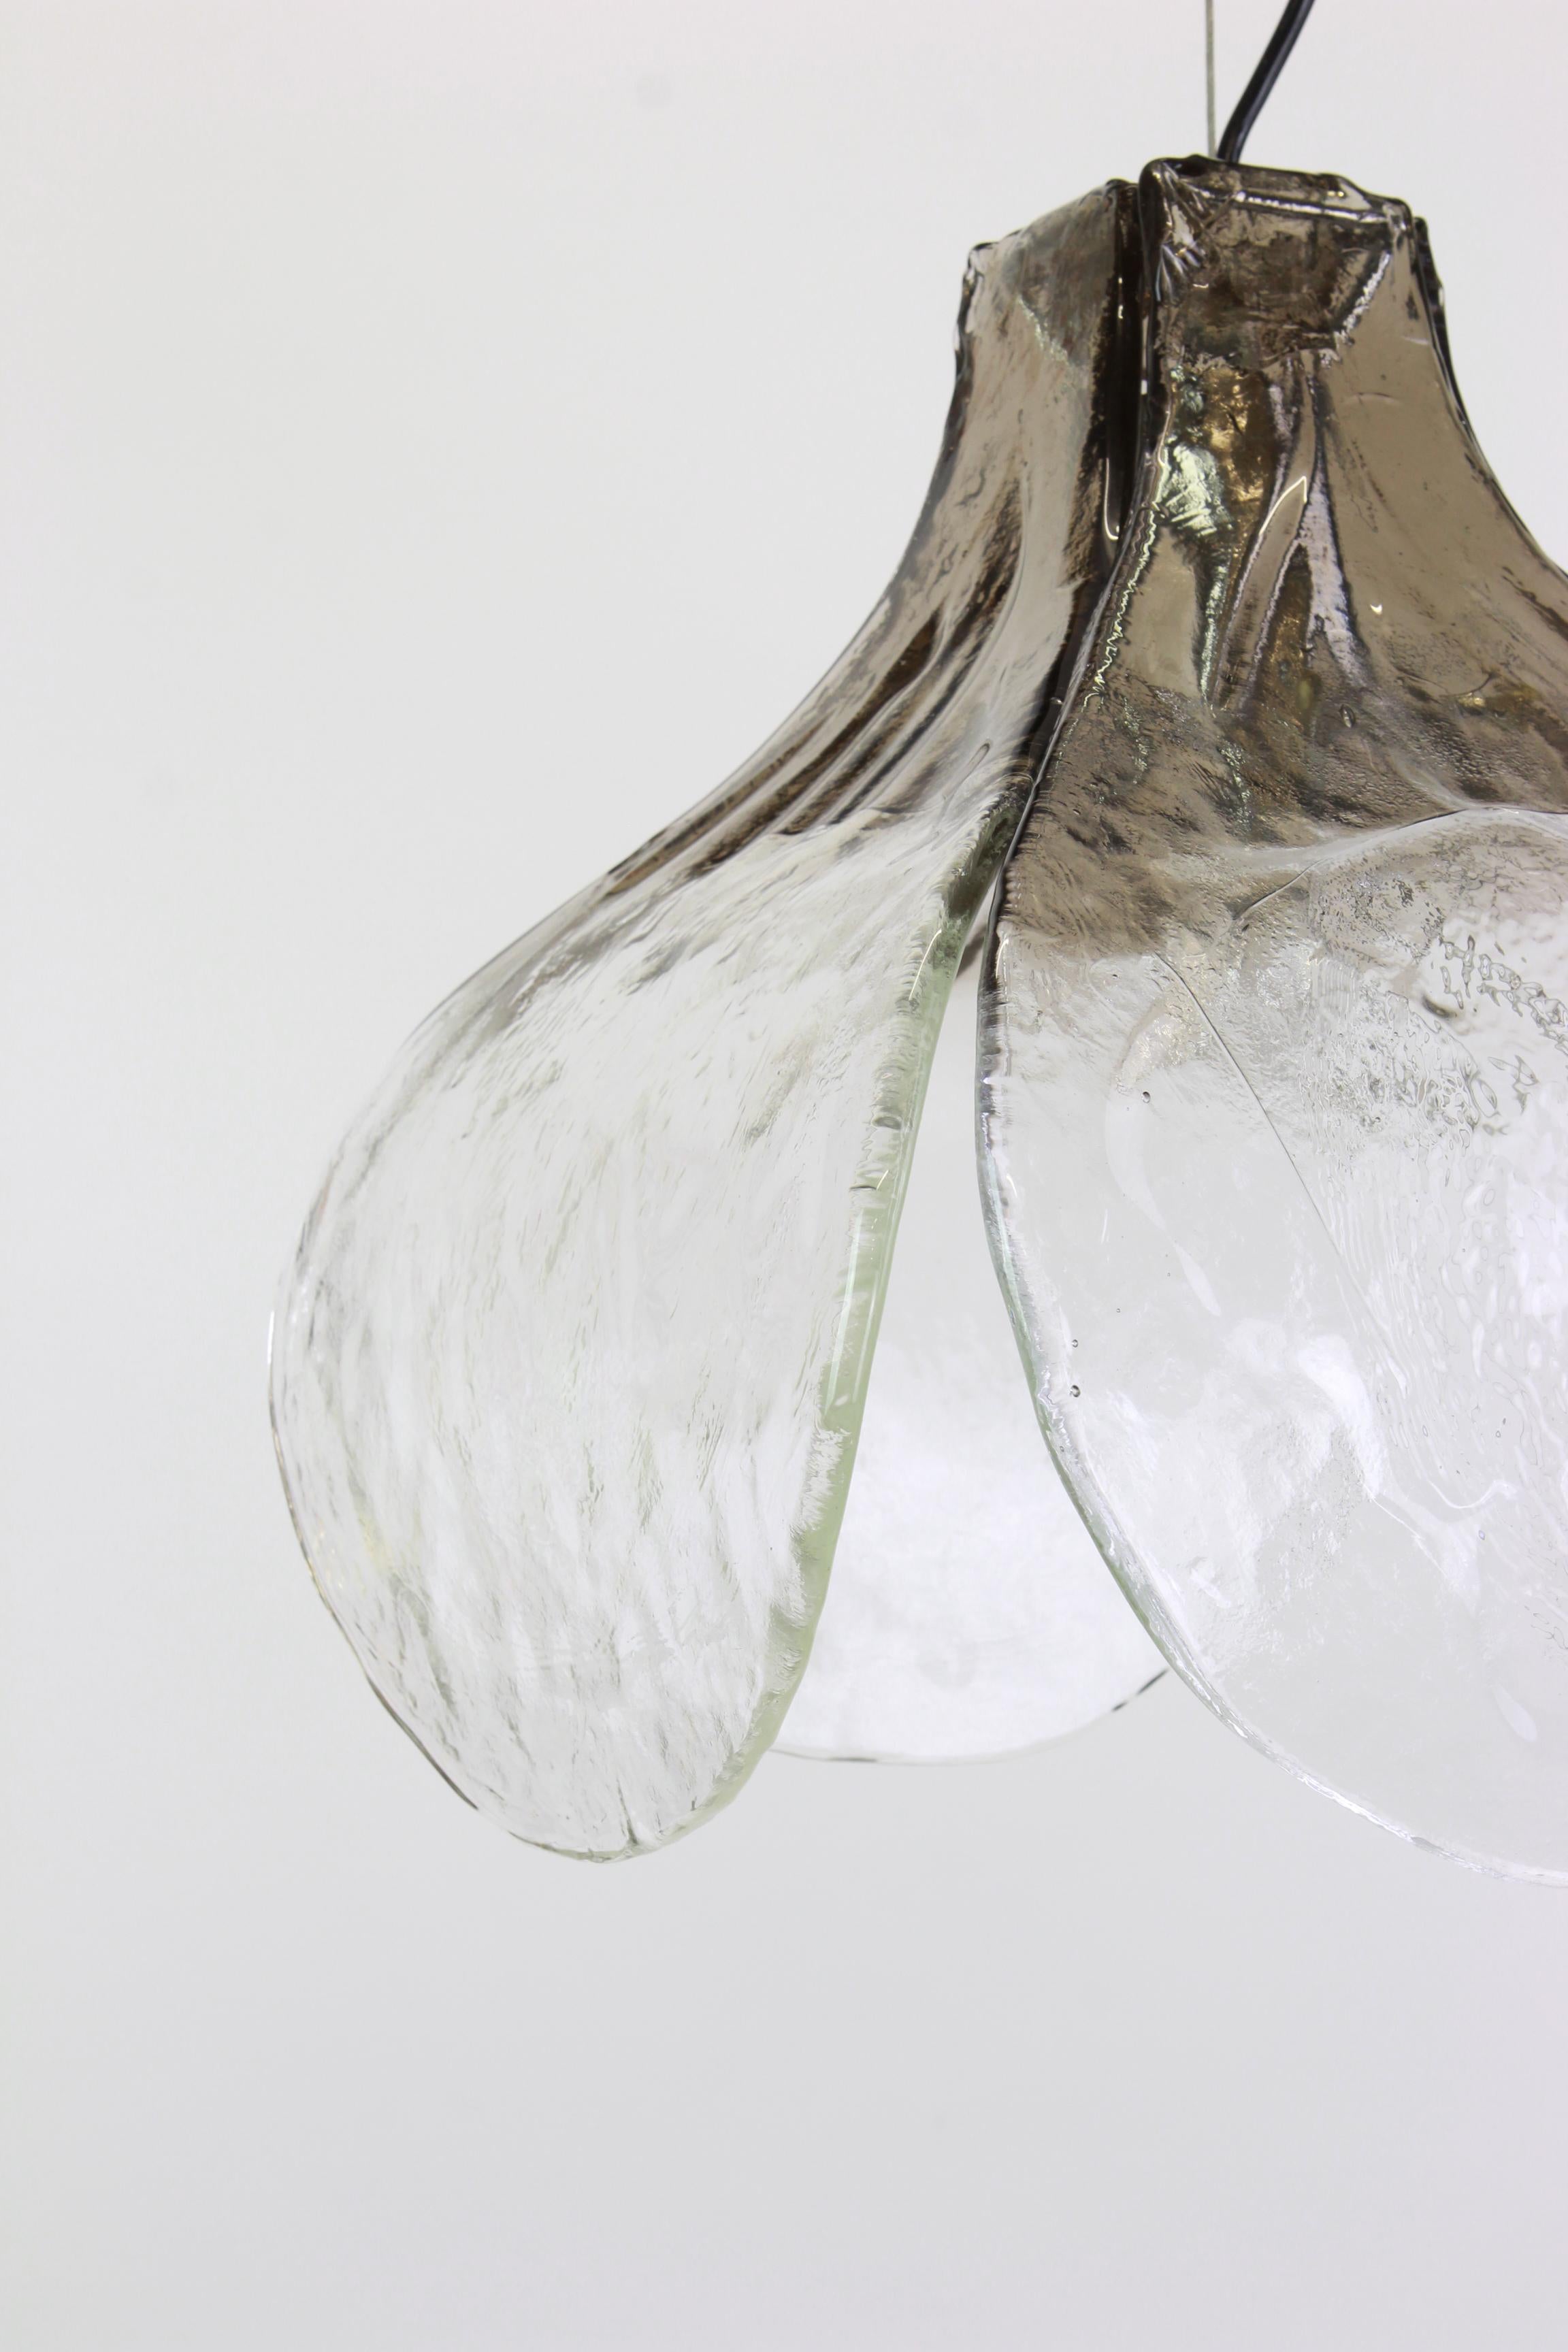 Murano pendant light designed by Carlo Nason for Mazzega, 1970s.

A wonderful floral pendant light with four large hand blown clear and smoked Murano glass petals which are supported by a metal frame, designed by Carlo Nason for Mazzega,